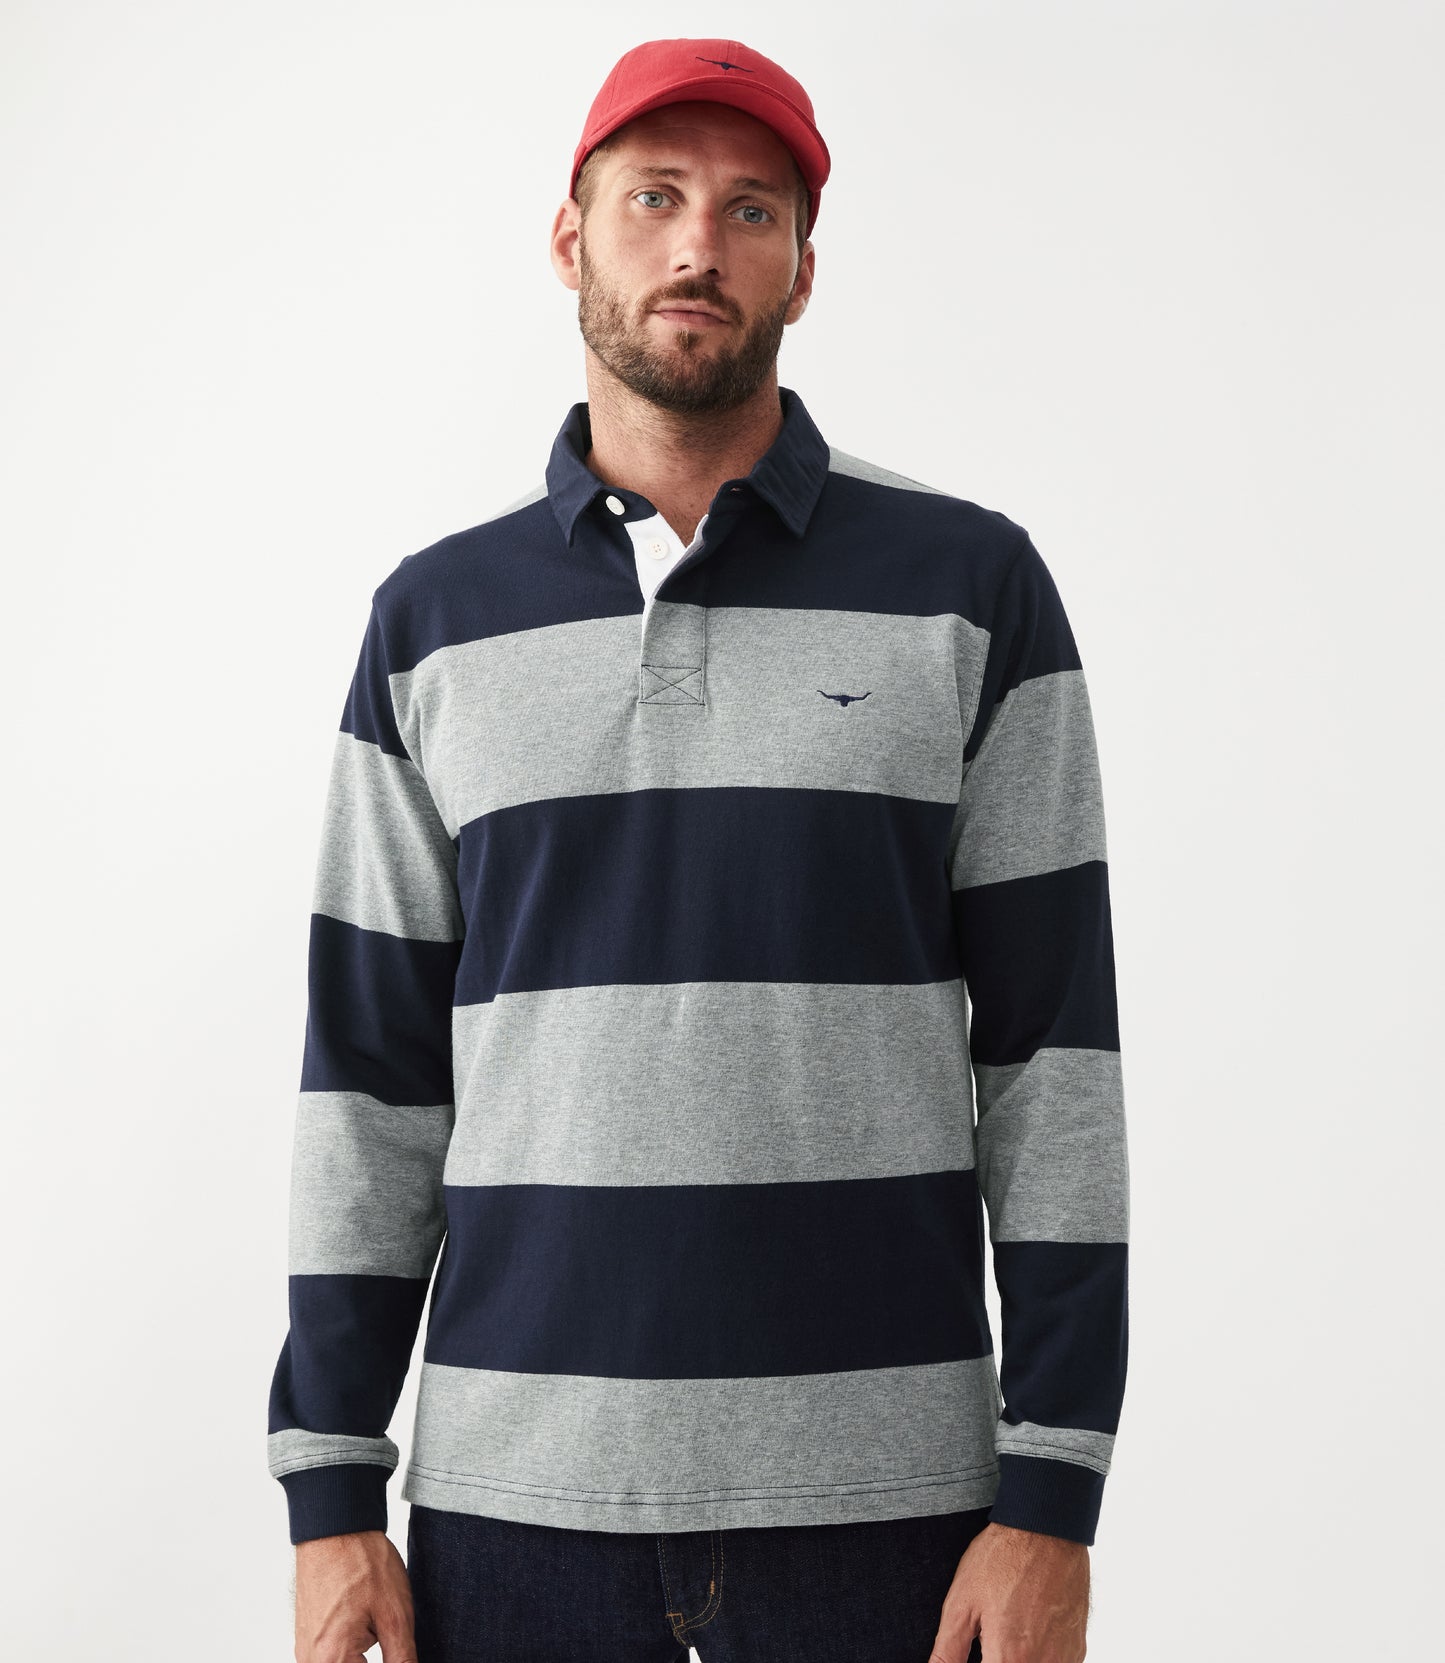 R.M Williams Rugby Shirts, The Tweedale Rugby in Navy/Grey